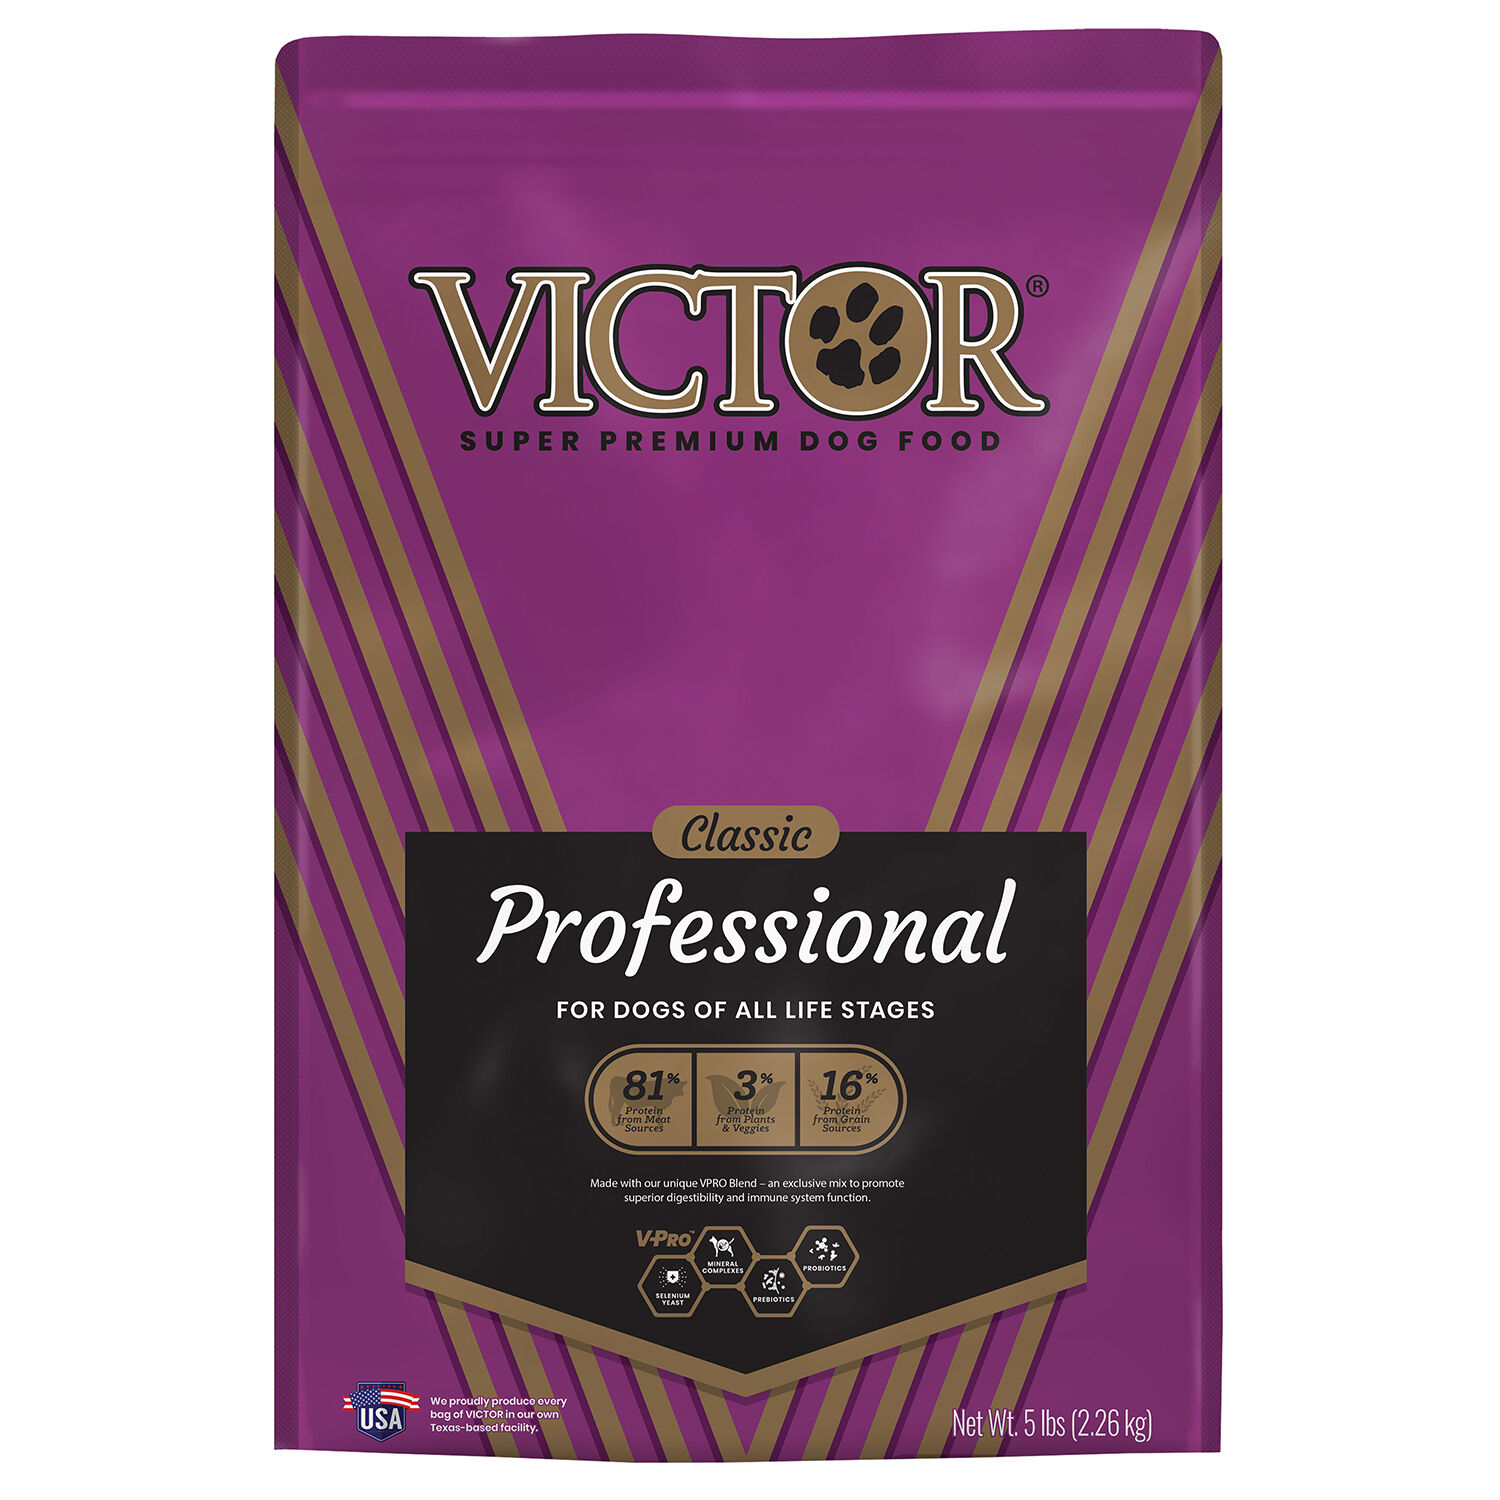 854524005320_5lb_VICTOR_Classic_Professional_Front (1).jpg